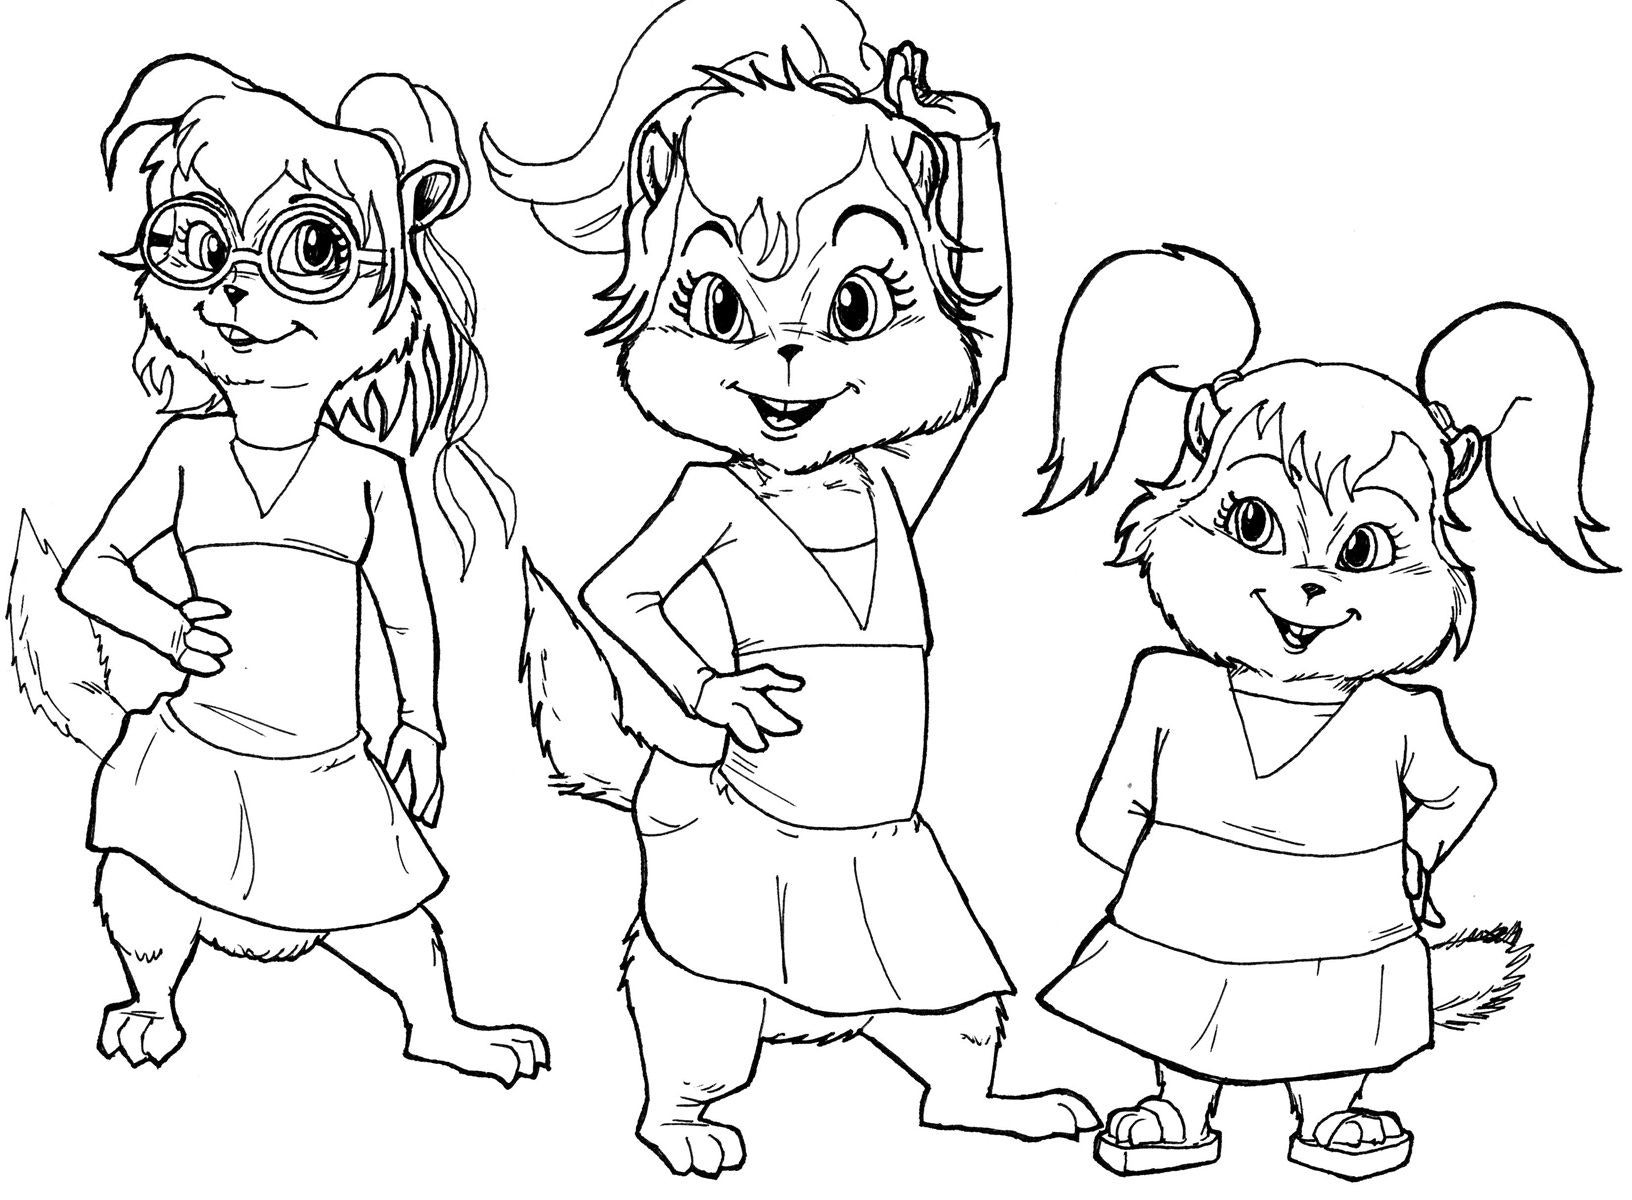 alvin-and-the-chipmunks-drawing-at-getdrawings-free-download